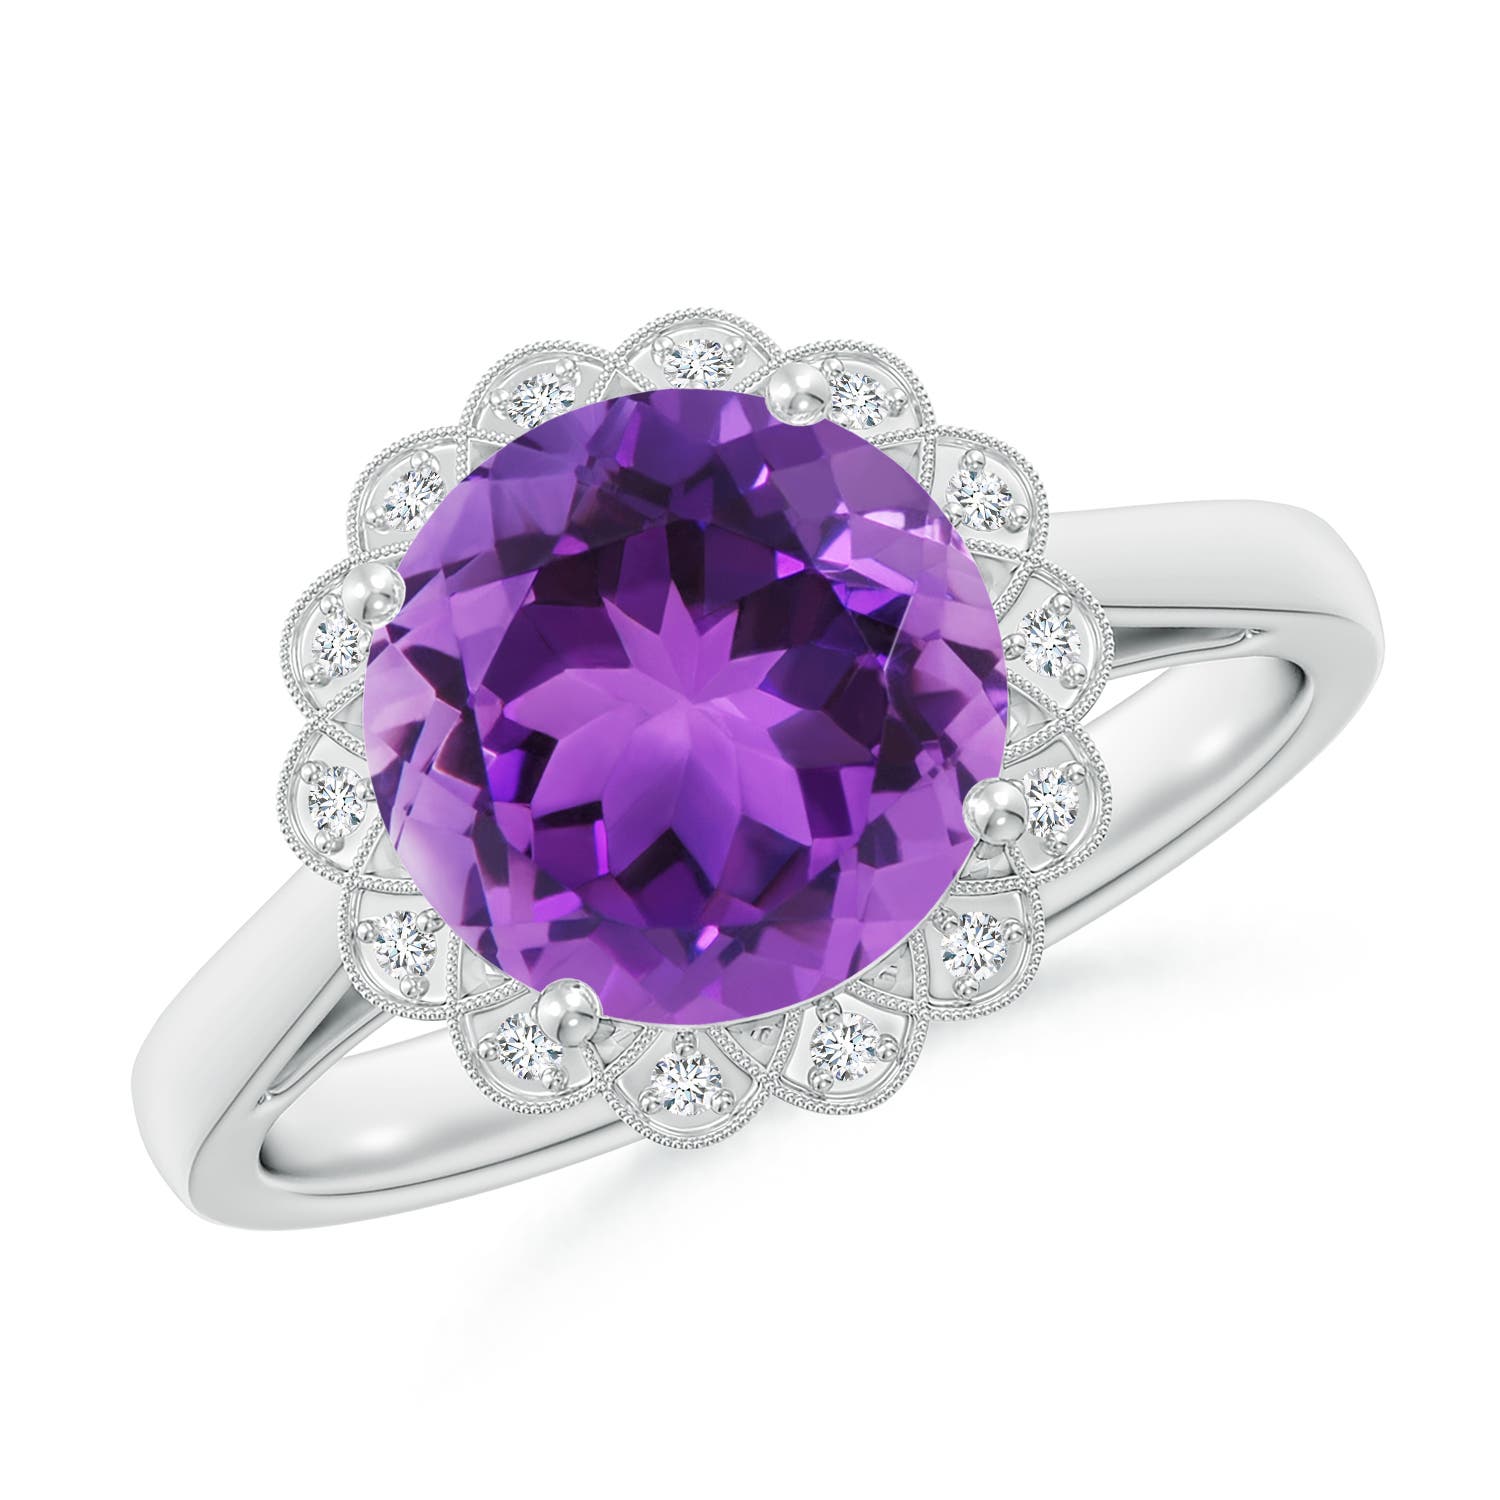 AAA - Amethyst / 2.52 CT / 14 KT White Gold